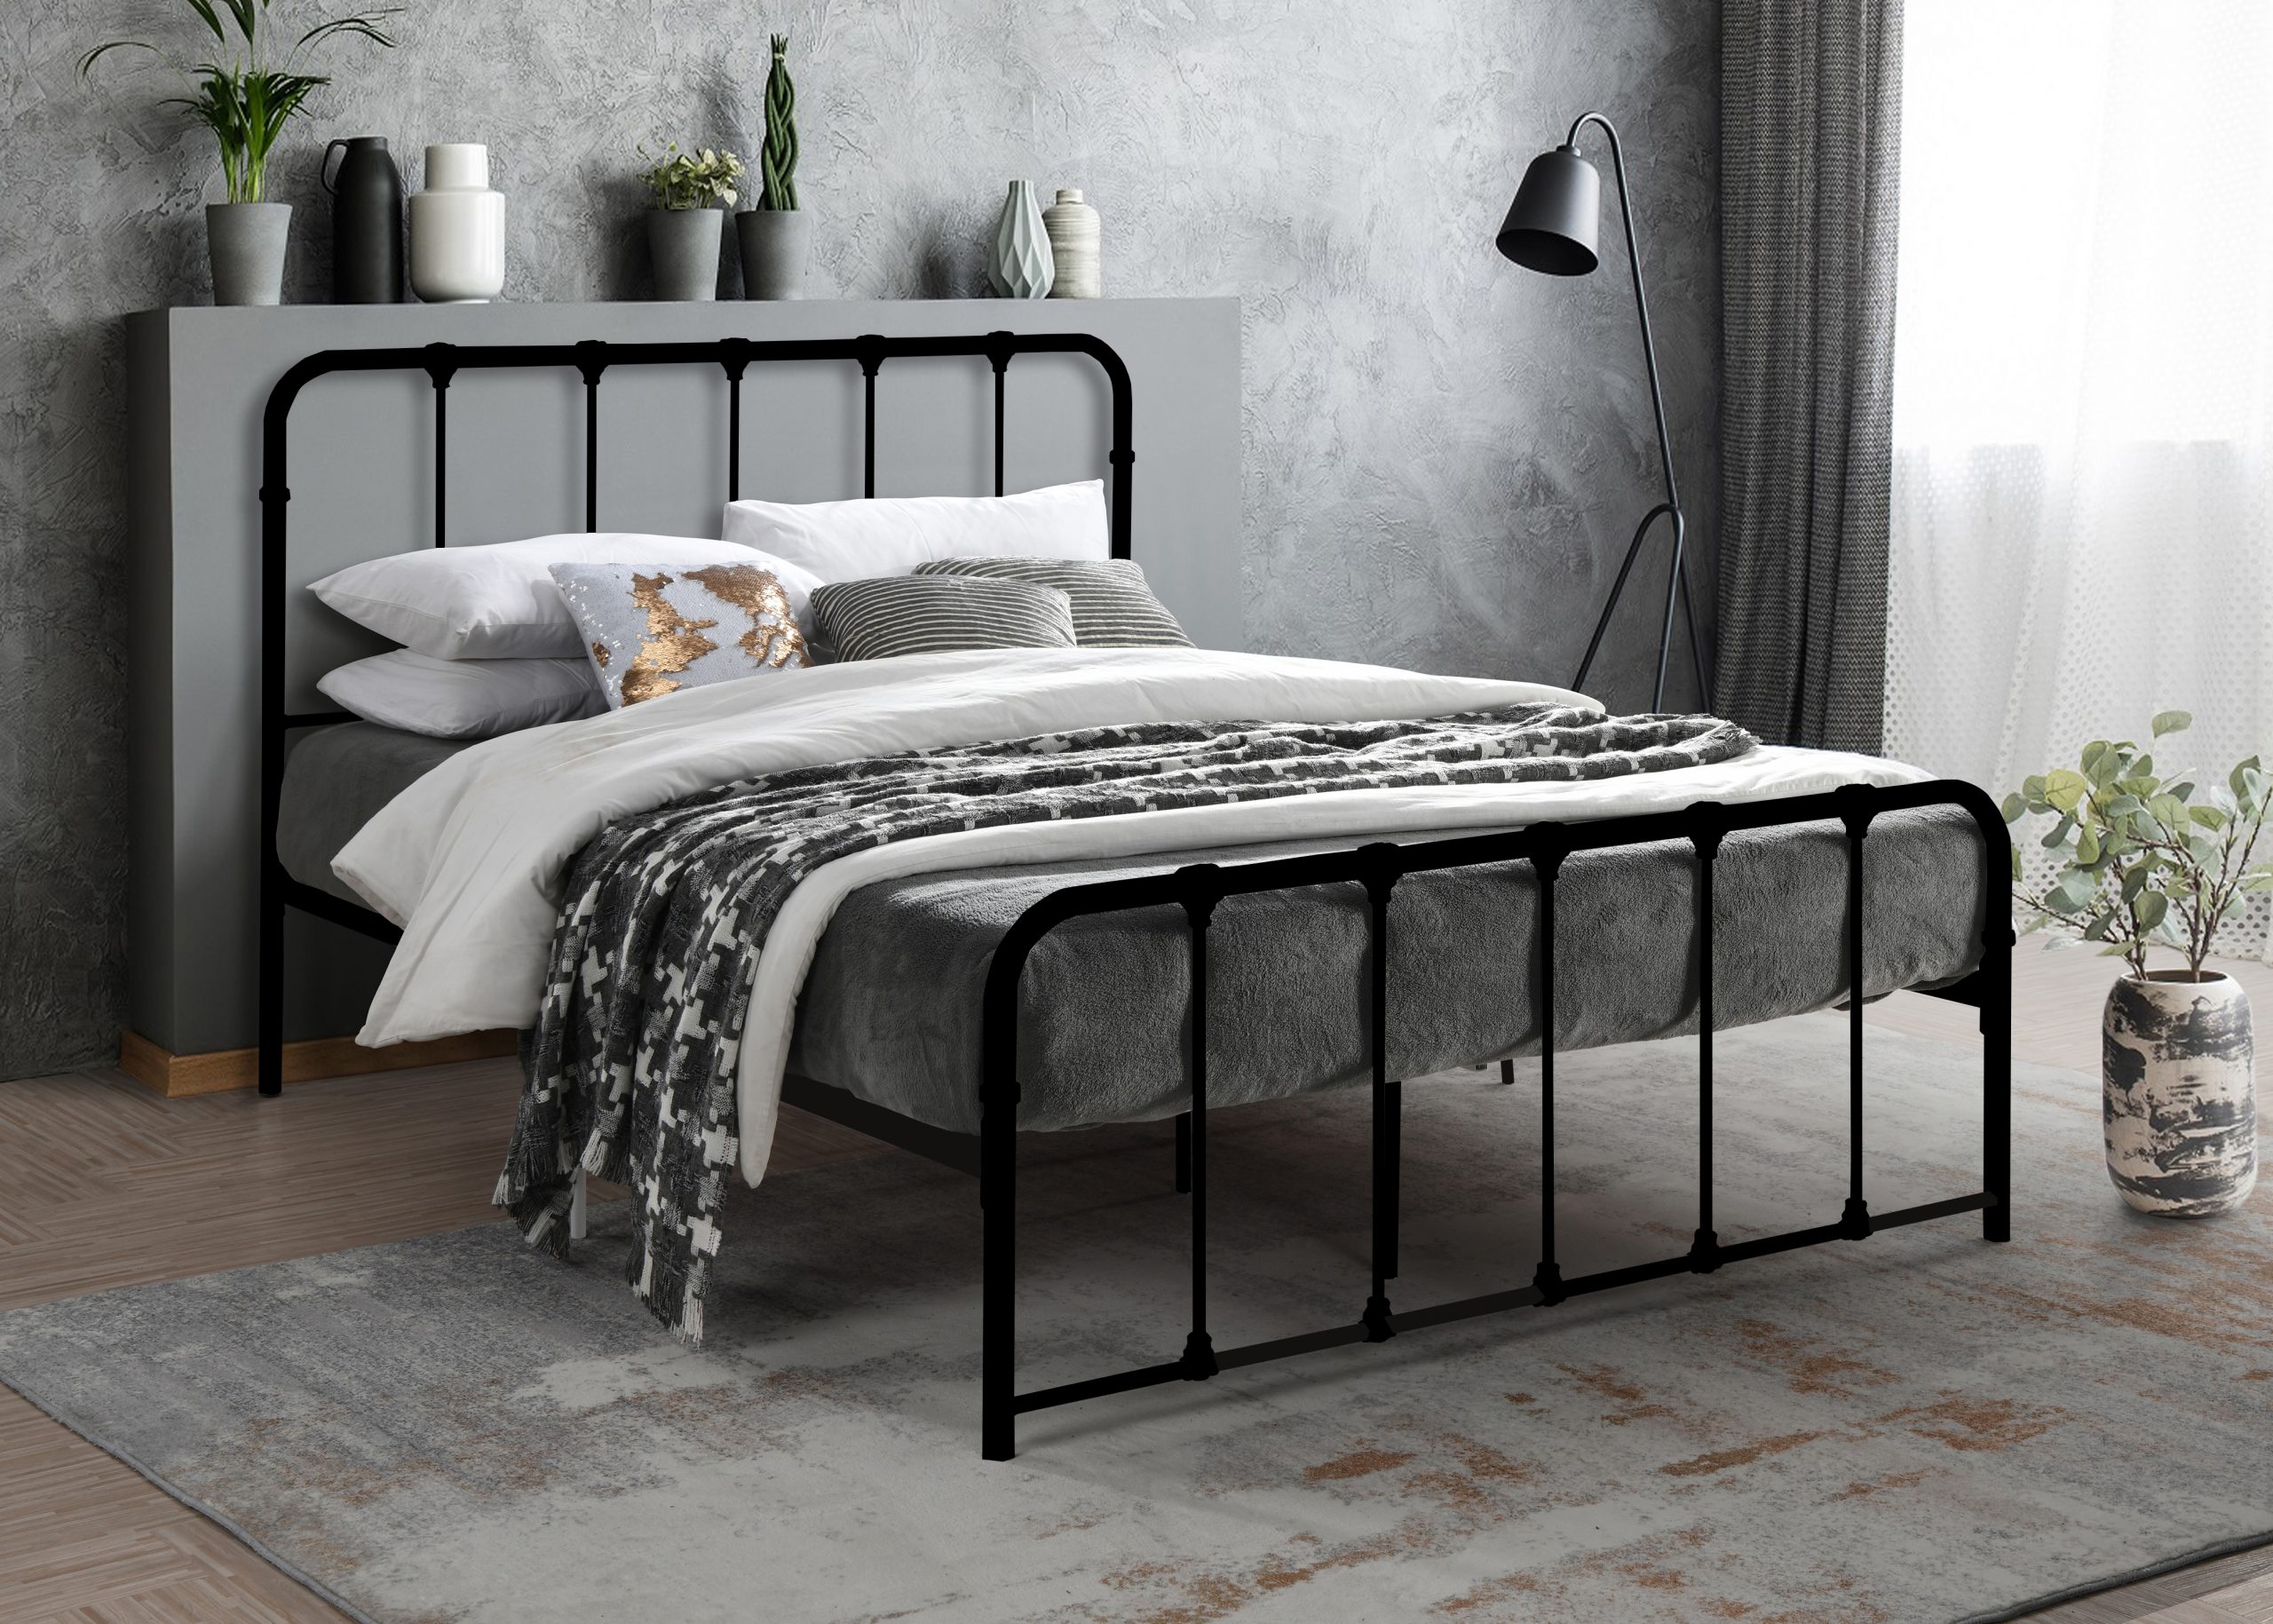 DOMEE queen size metal bed frame-black - FurnitureDirect.com.my